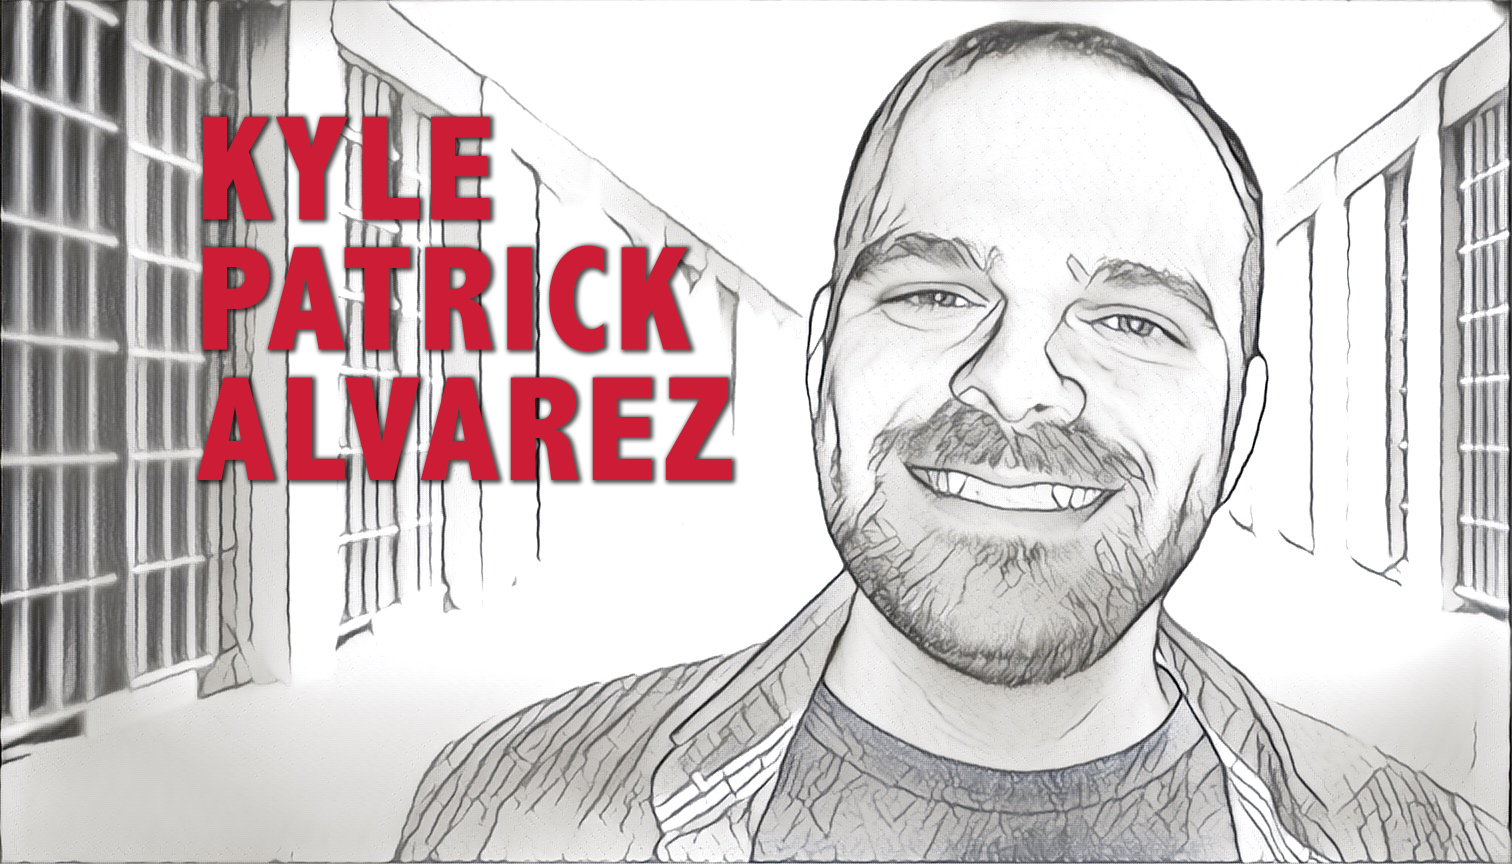 MAKING THE STANFORD PRISON EXPERIMENT: An Interview with Kyle Patrick Alvarez